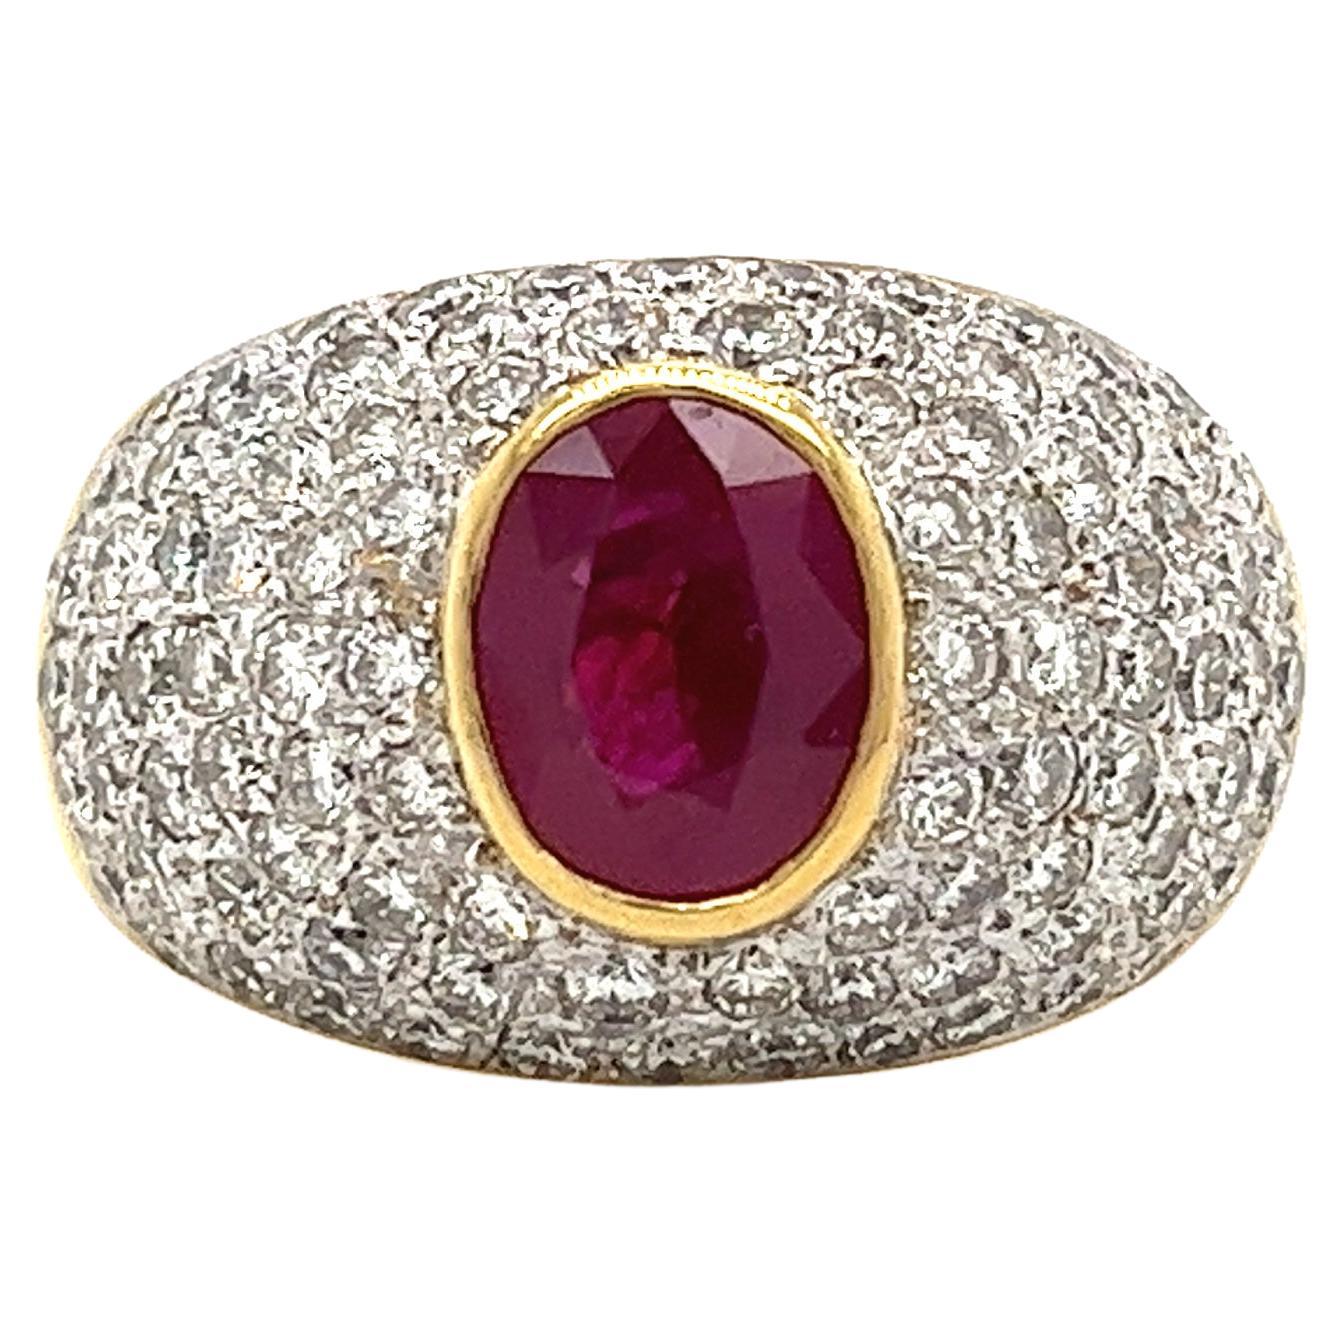 1.73 Carat Ruby and Diamond Cluster Dome Cocktail Ring in 18k Gold